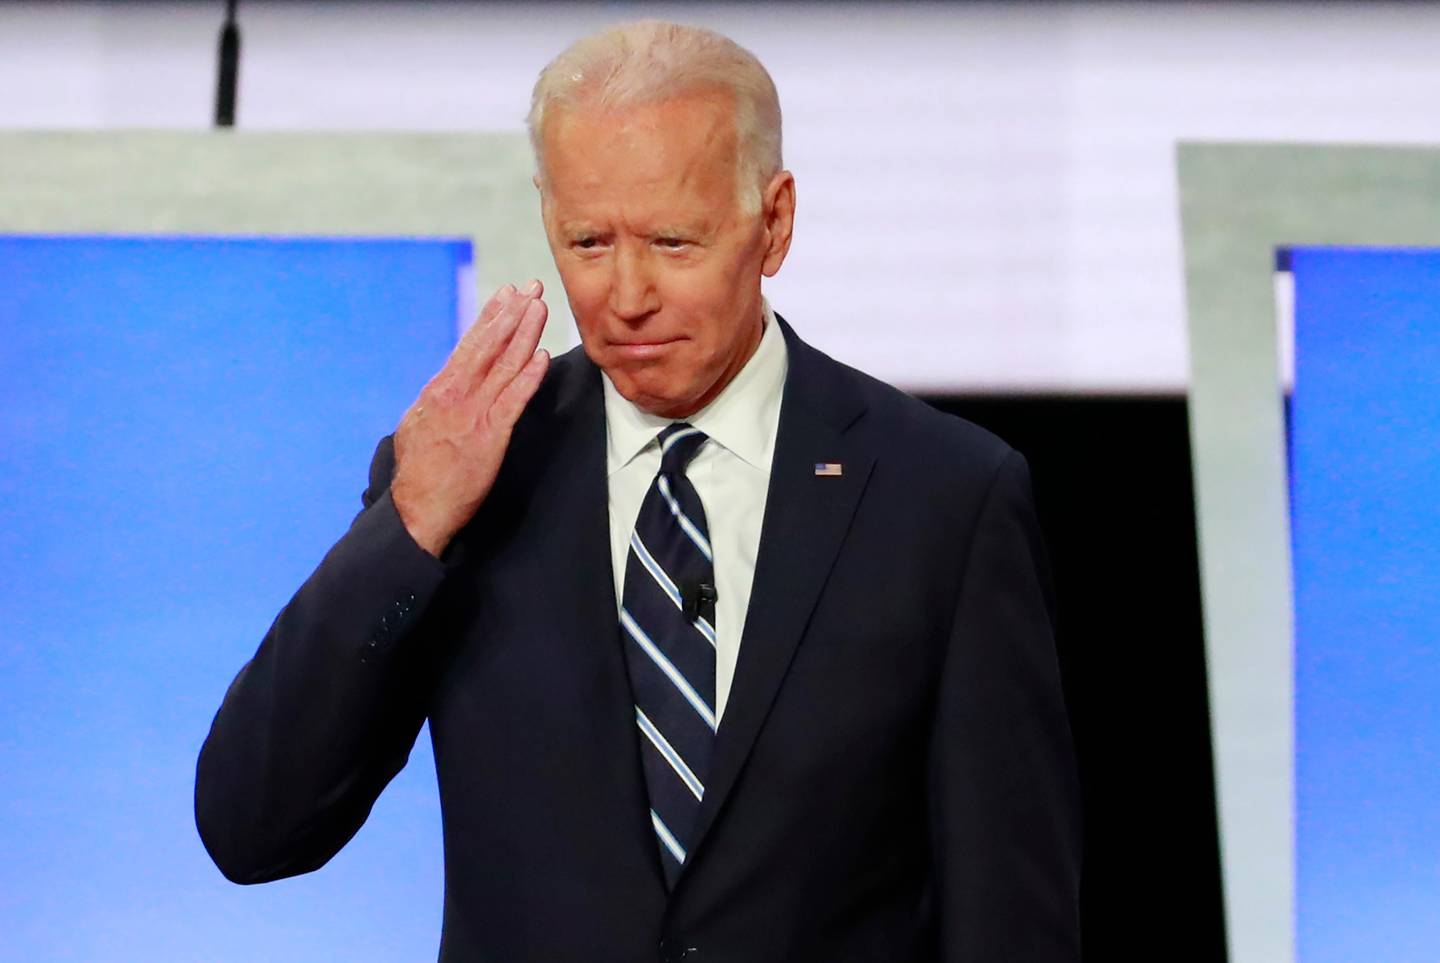 Candidate former Vice President Joe Biden before the start of the second night of the second 2020 Democratic U.S. presidential debate in Detroit, Michigan, July 31, 2019. REUTERS/Lucas Jackson